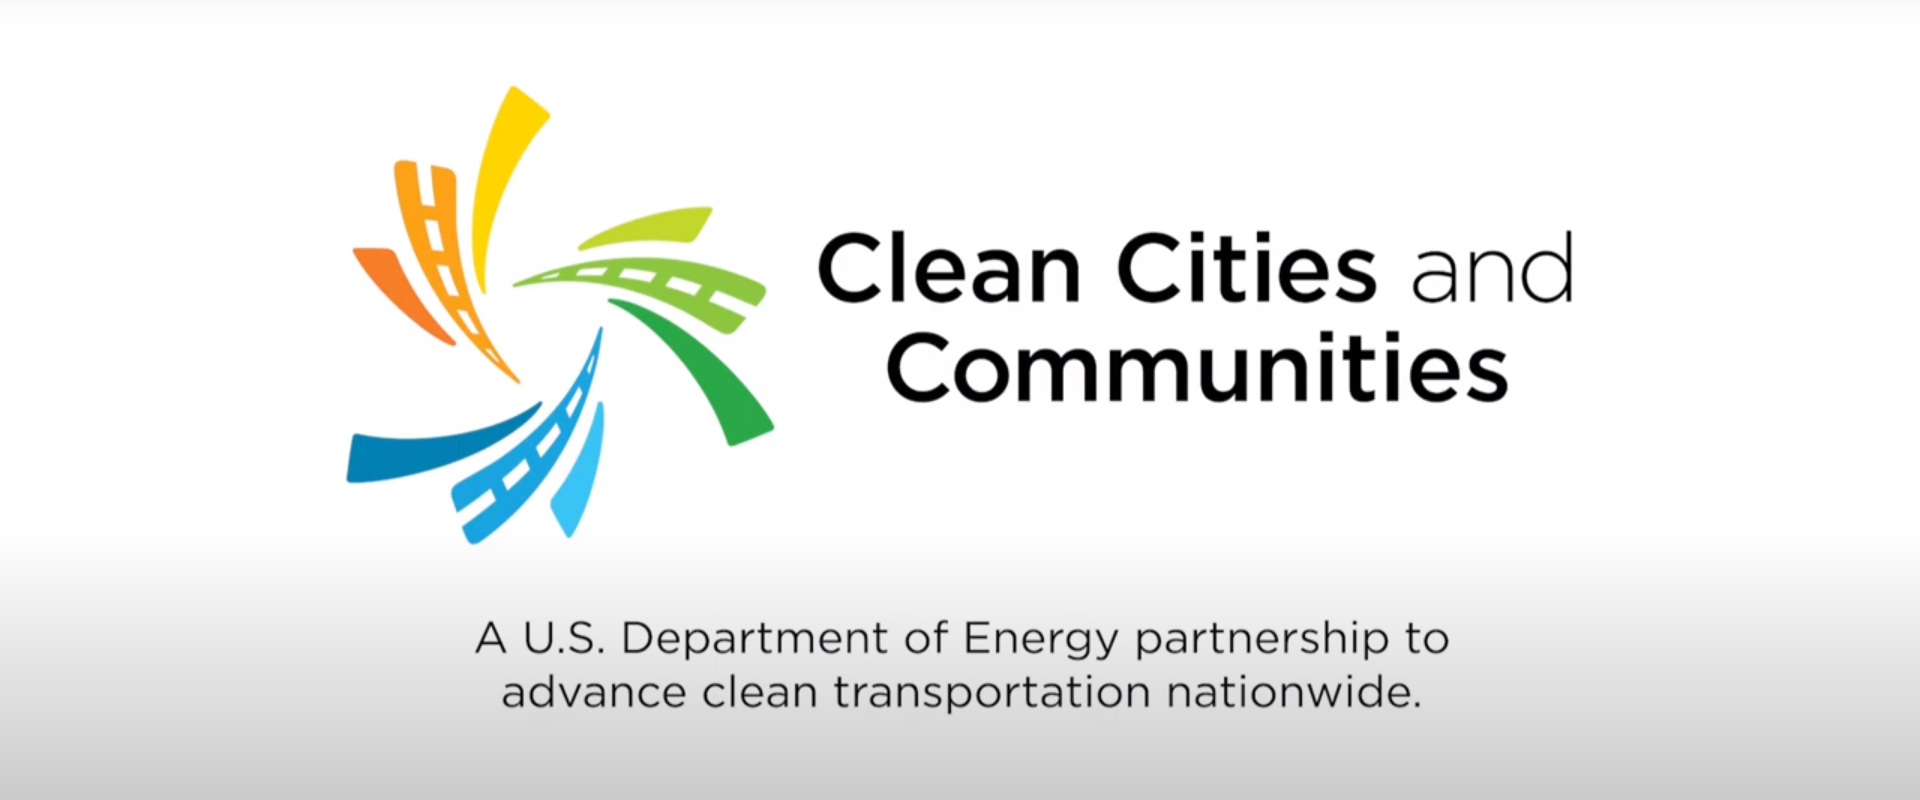 Clean Cities and Communities Revamps Name and Image 3